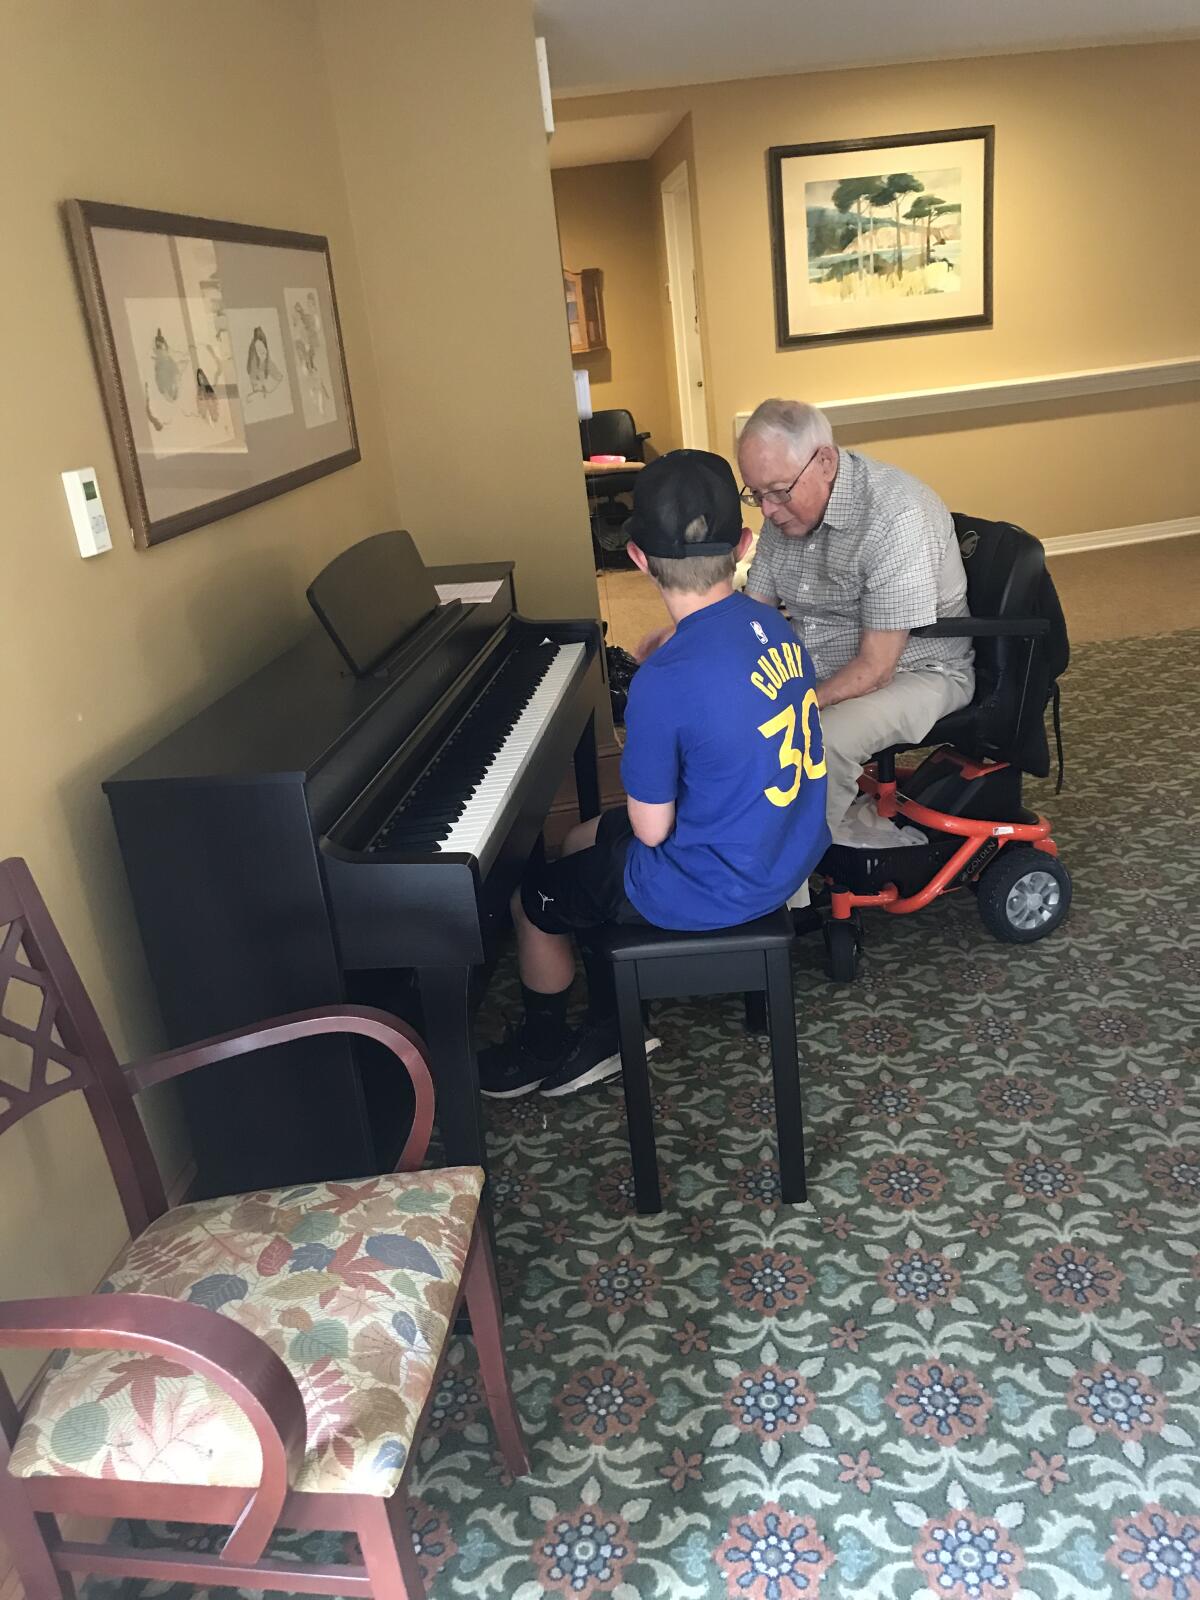 White Sands resident Jim Jackson teaches piano to one of the children participating in a week's worth of activities.